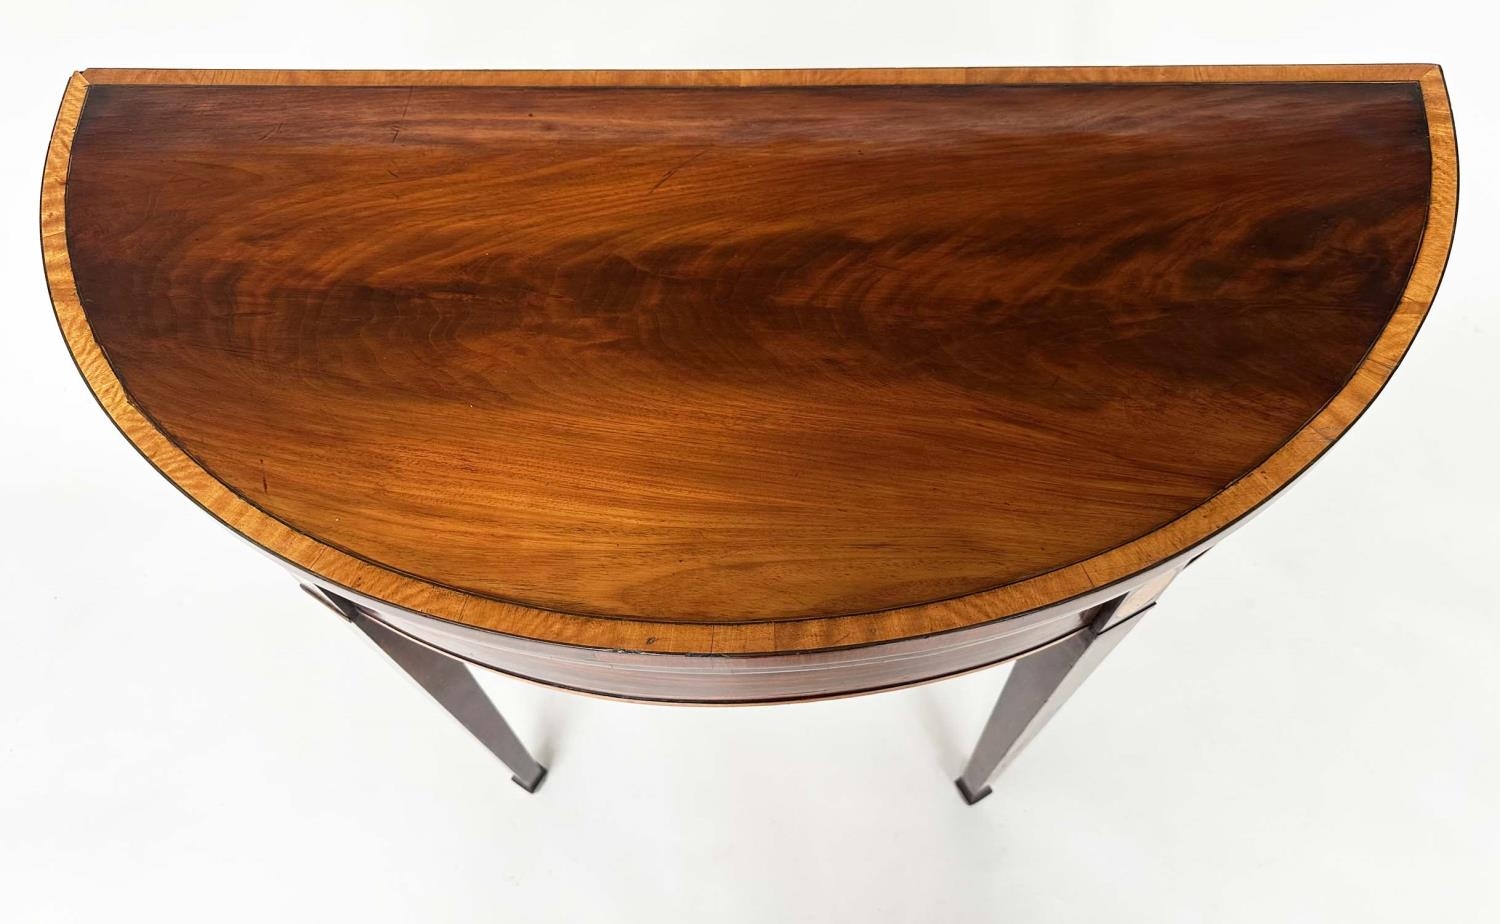 CARD TABLE, George III flame mahogany and satinwood crossbanded, demilune foldover baise lined, 90cm - Image 8 of 12